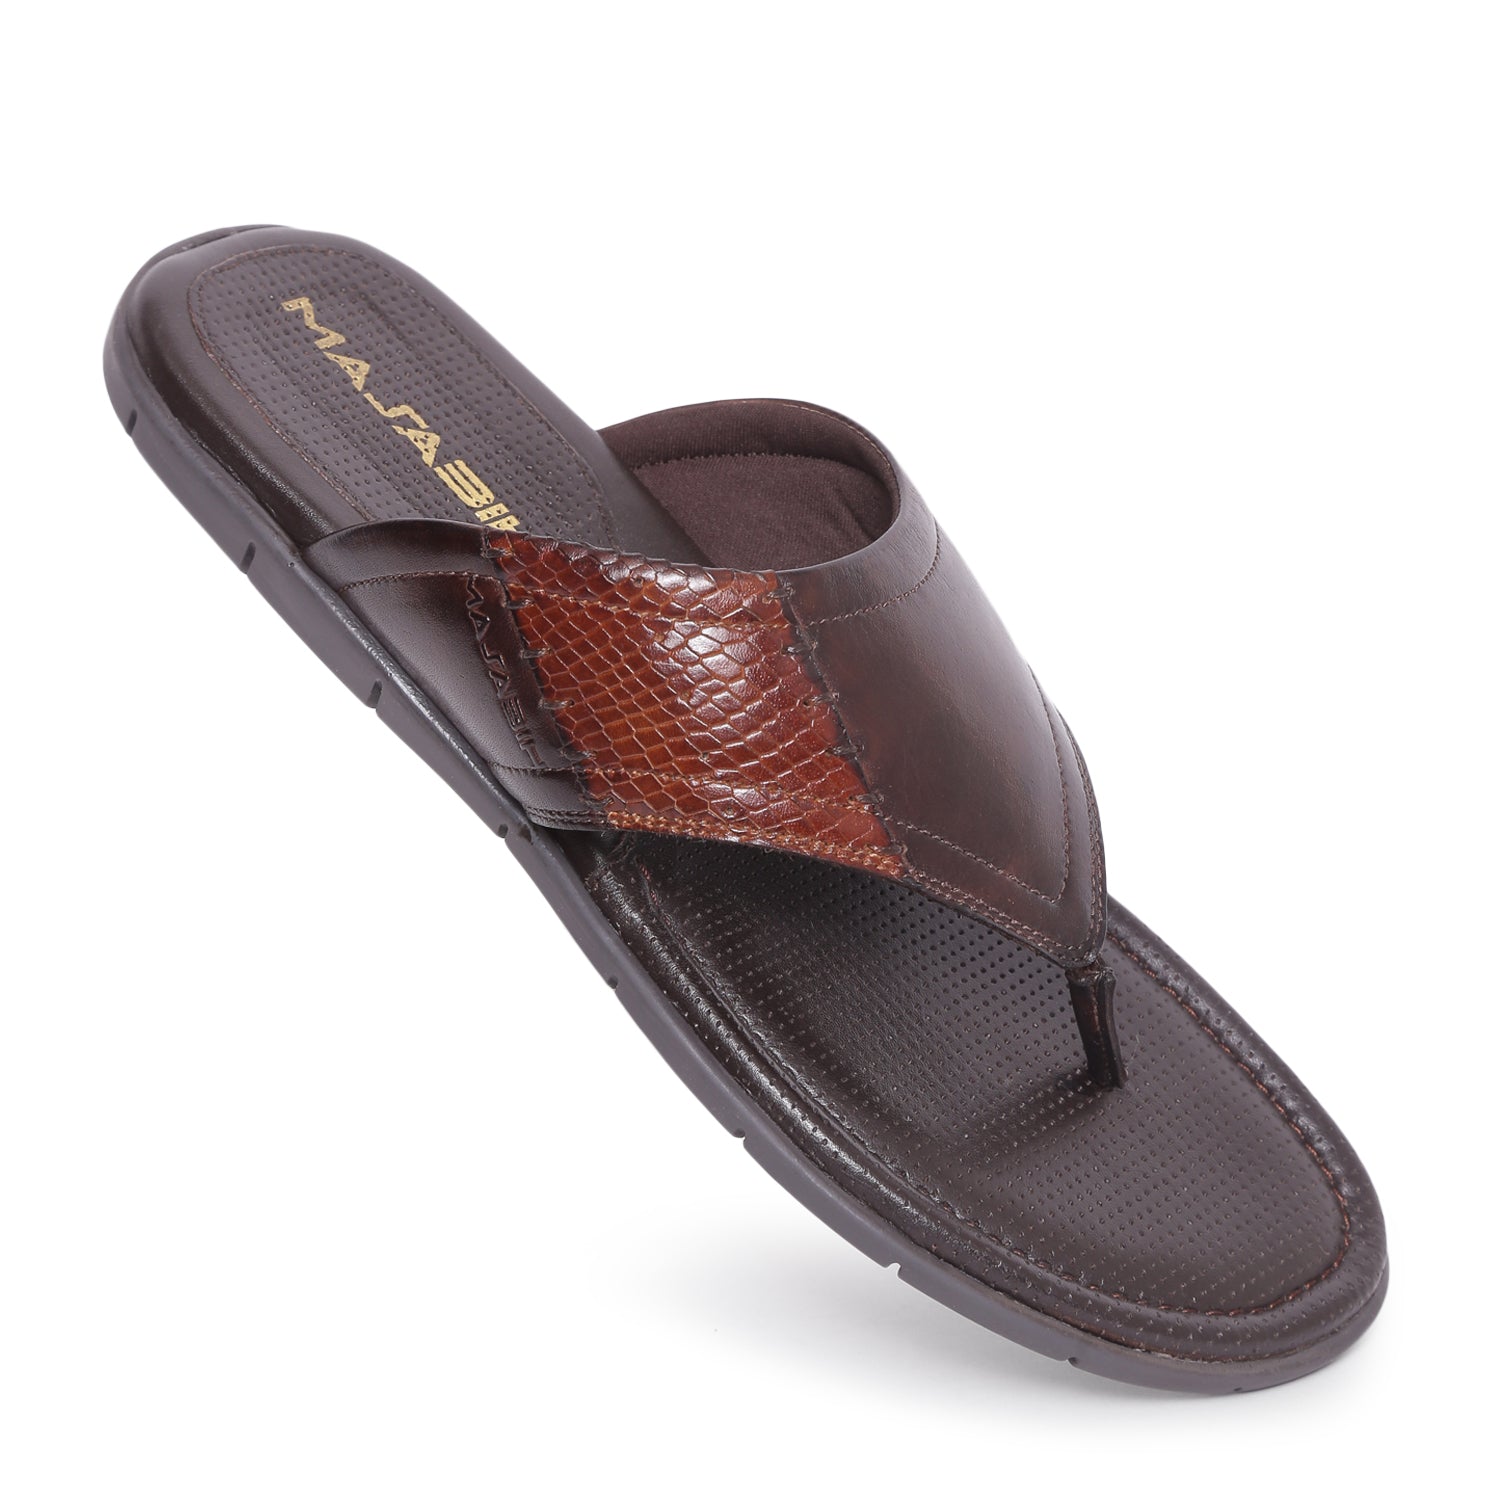 MASABIH Geniune Leather Soft Brown / SISSY Print Tan Color modern thong sandals for Mens